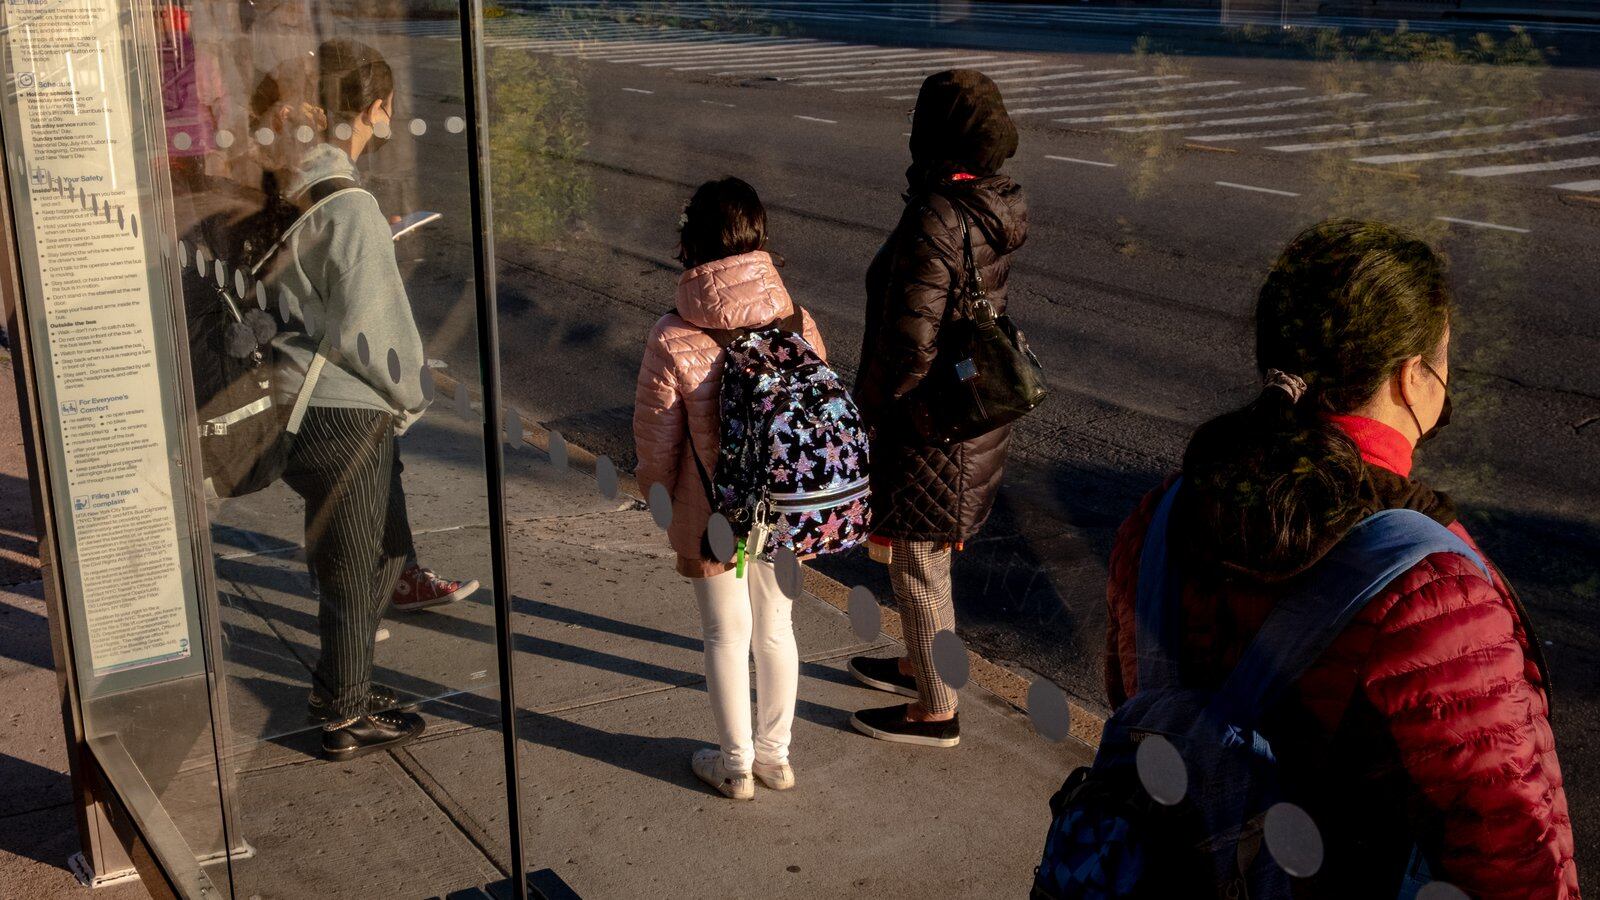 A woman stands with her two daughters and another woman at a city bus stop.